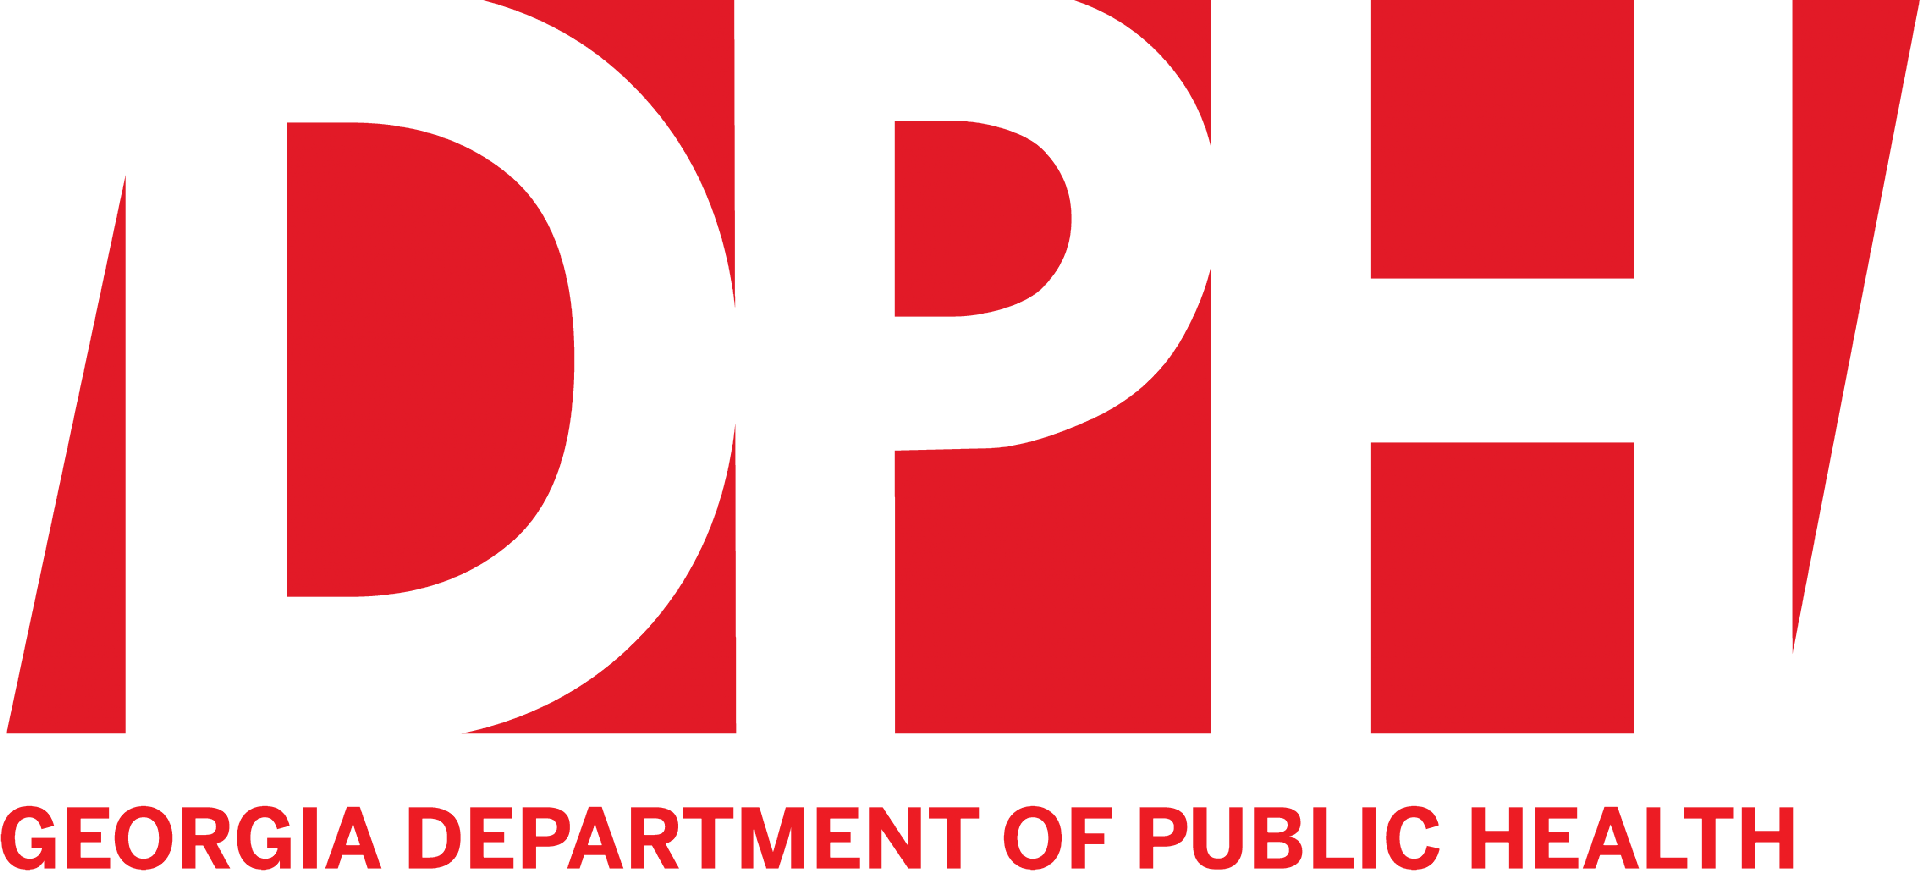 The department of public health logo is shown.